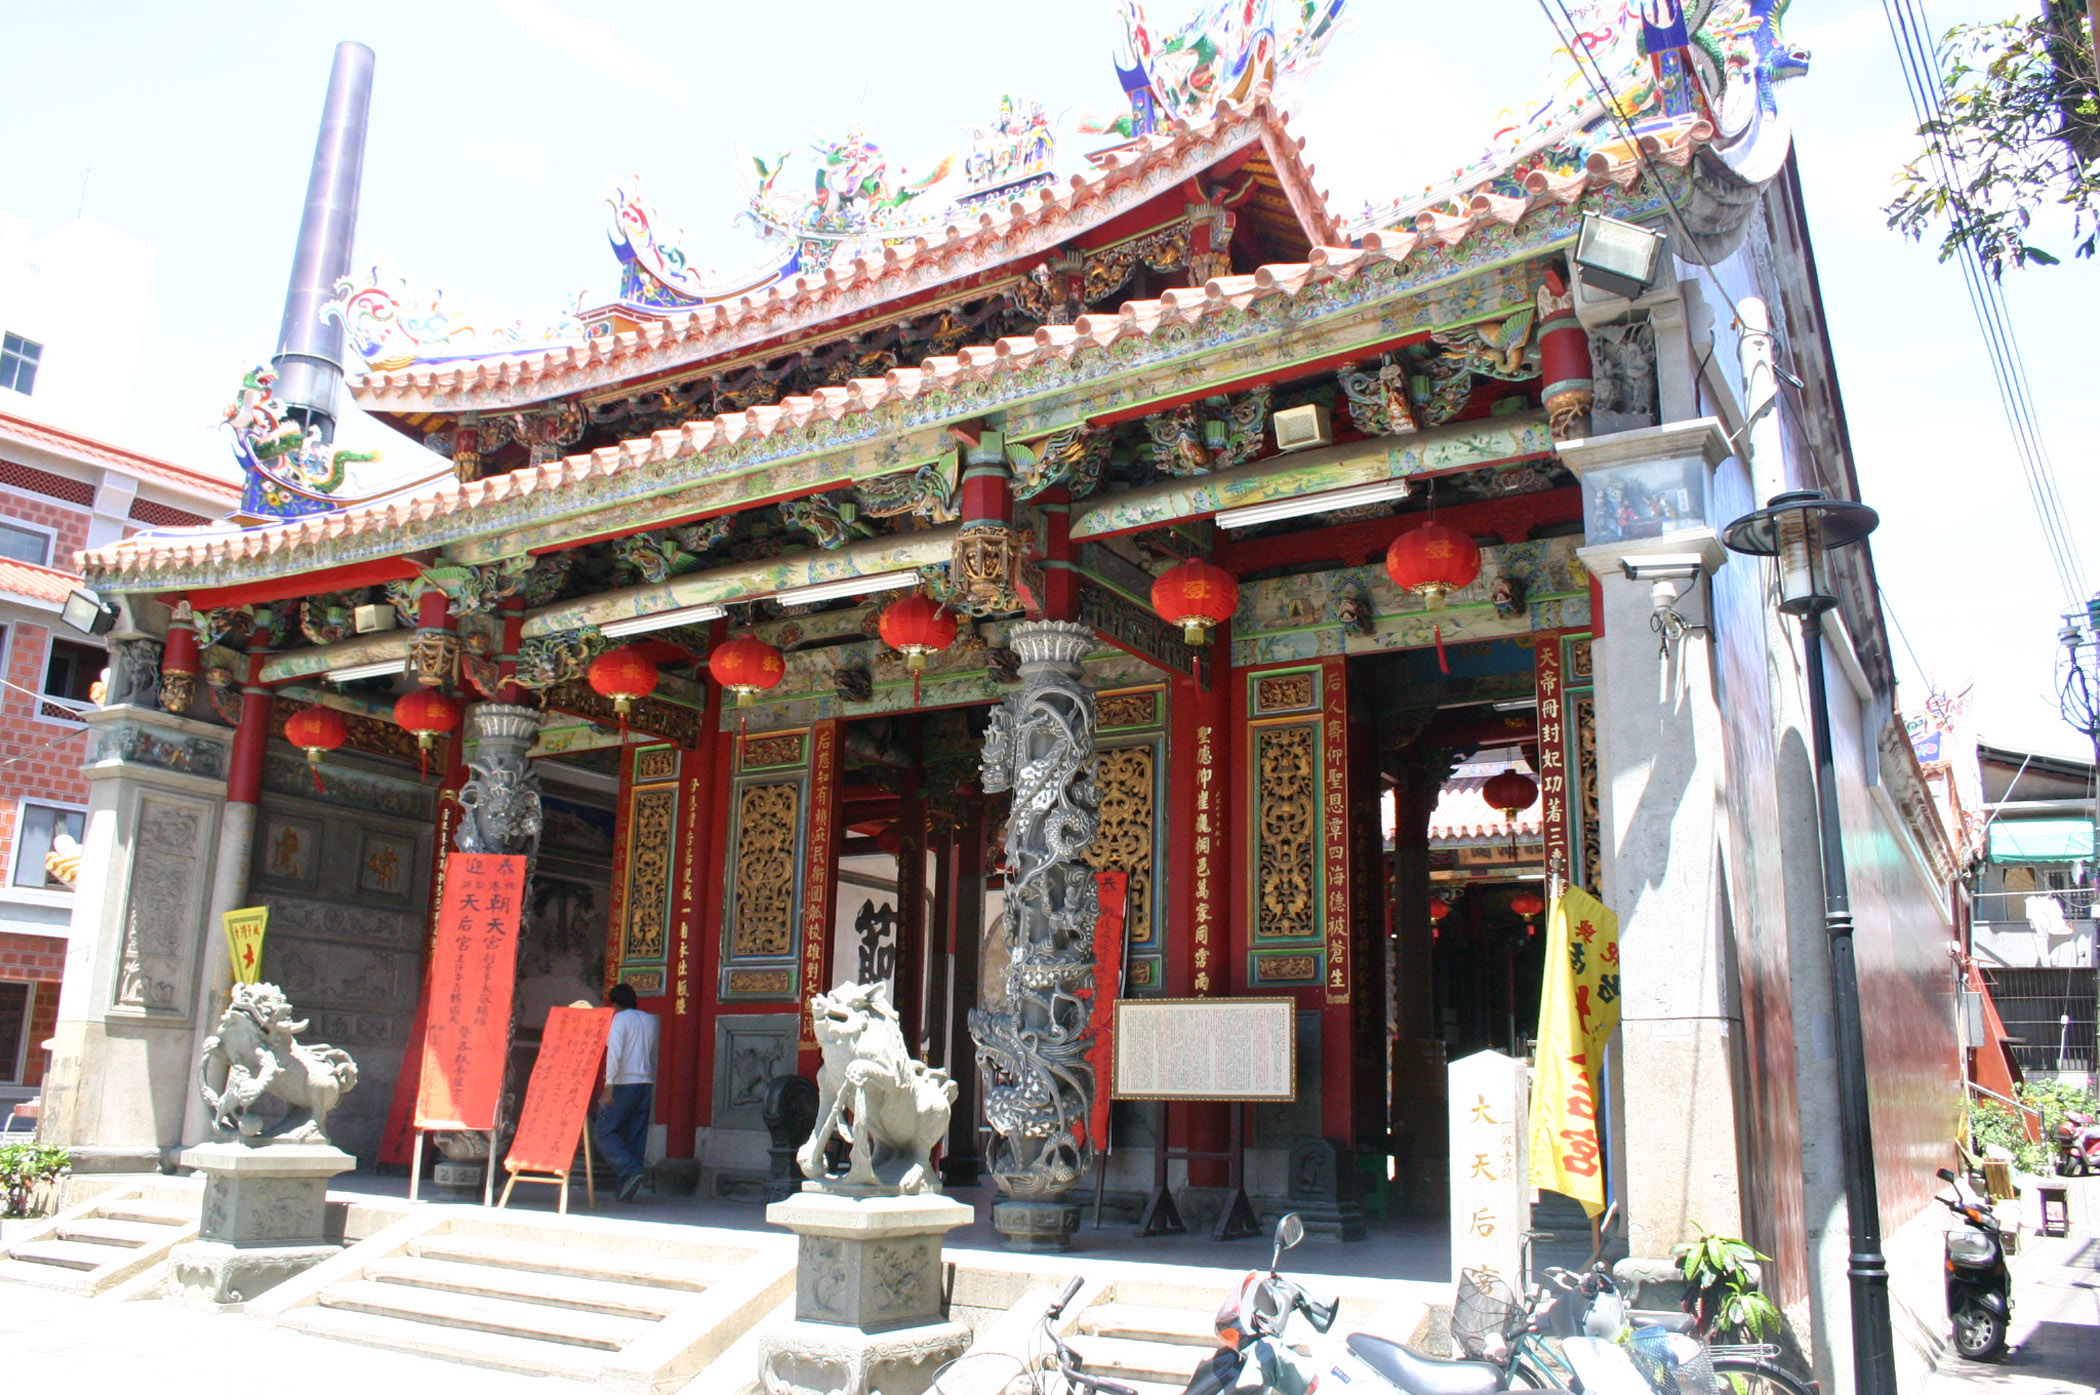 Air ionizers installed in Grand Matsu Temple in Tainan to protect murals from pollution